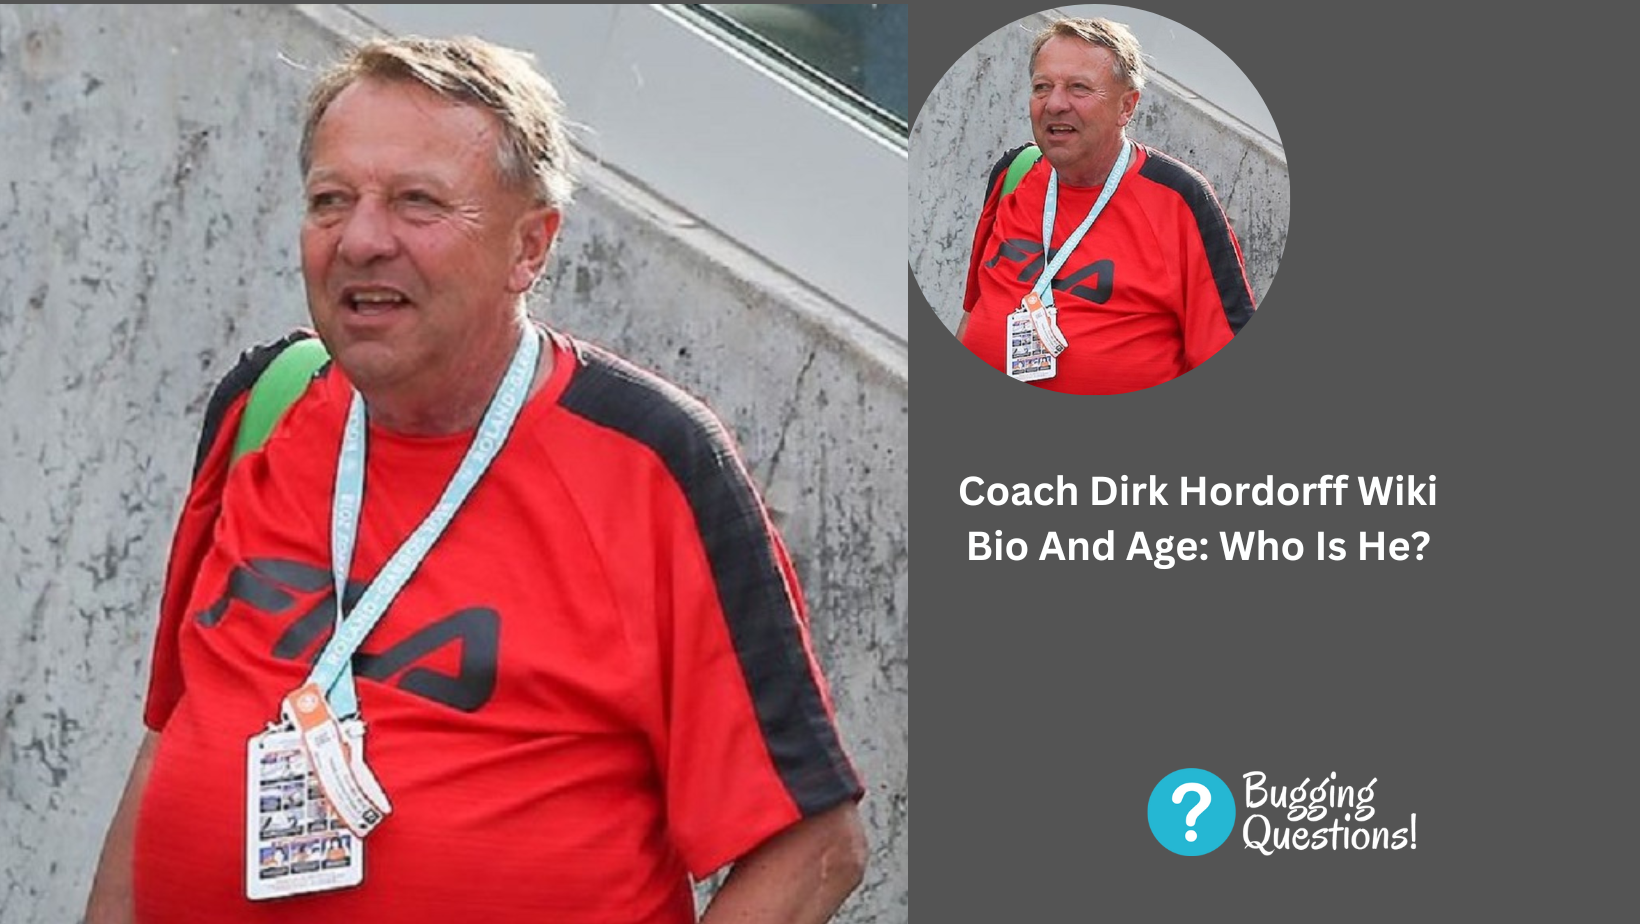 Coach Dirk Hordorff Wiki Bio And Age: Who Is He?